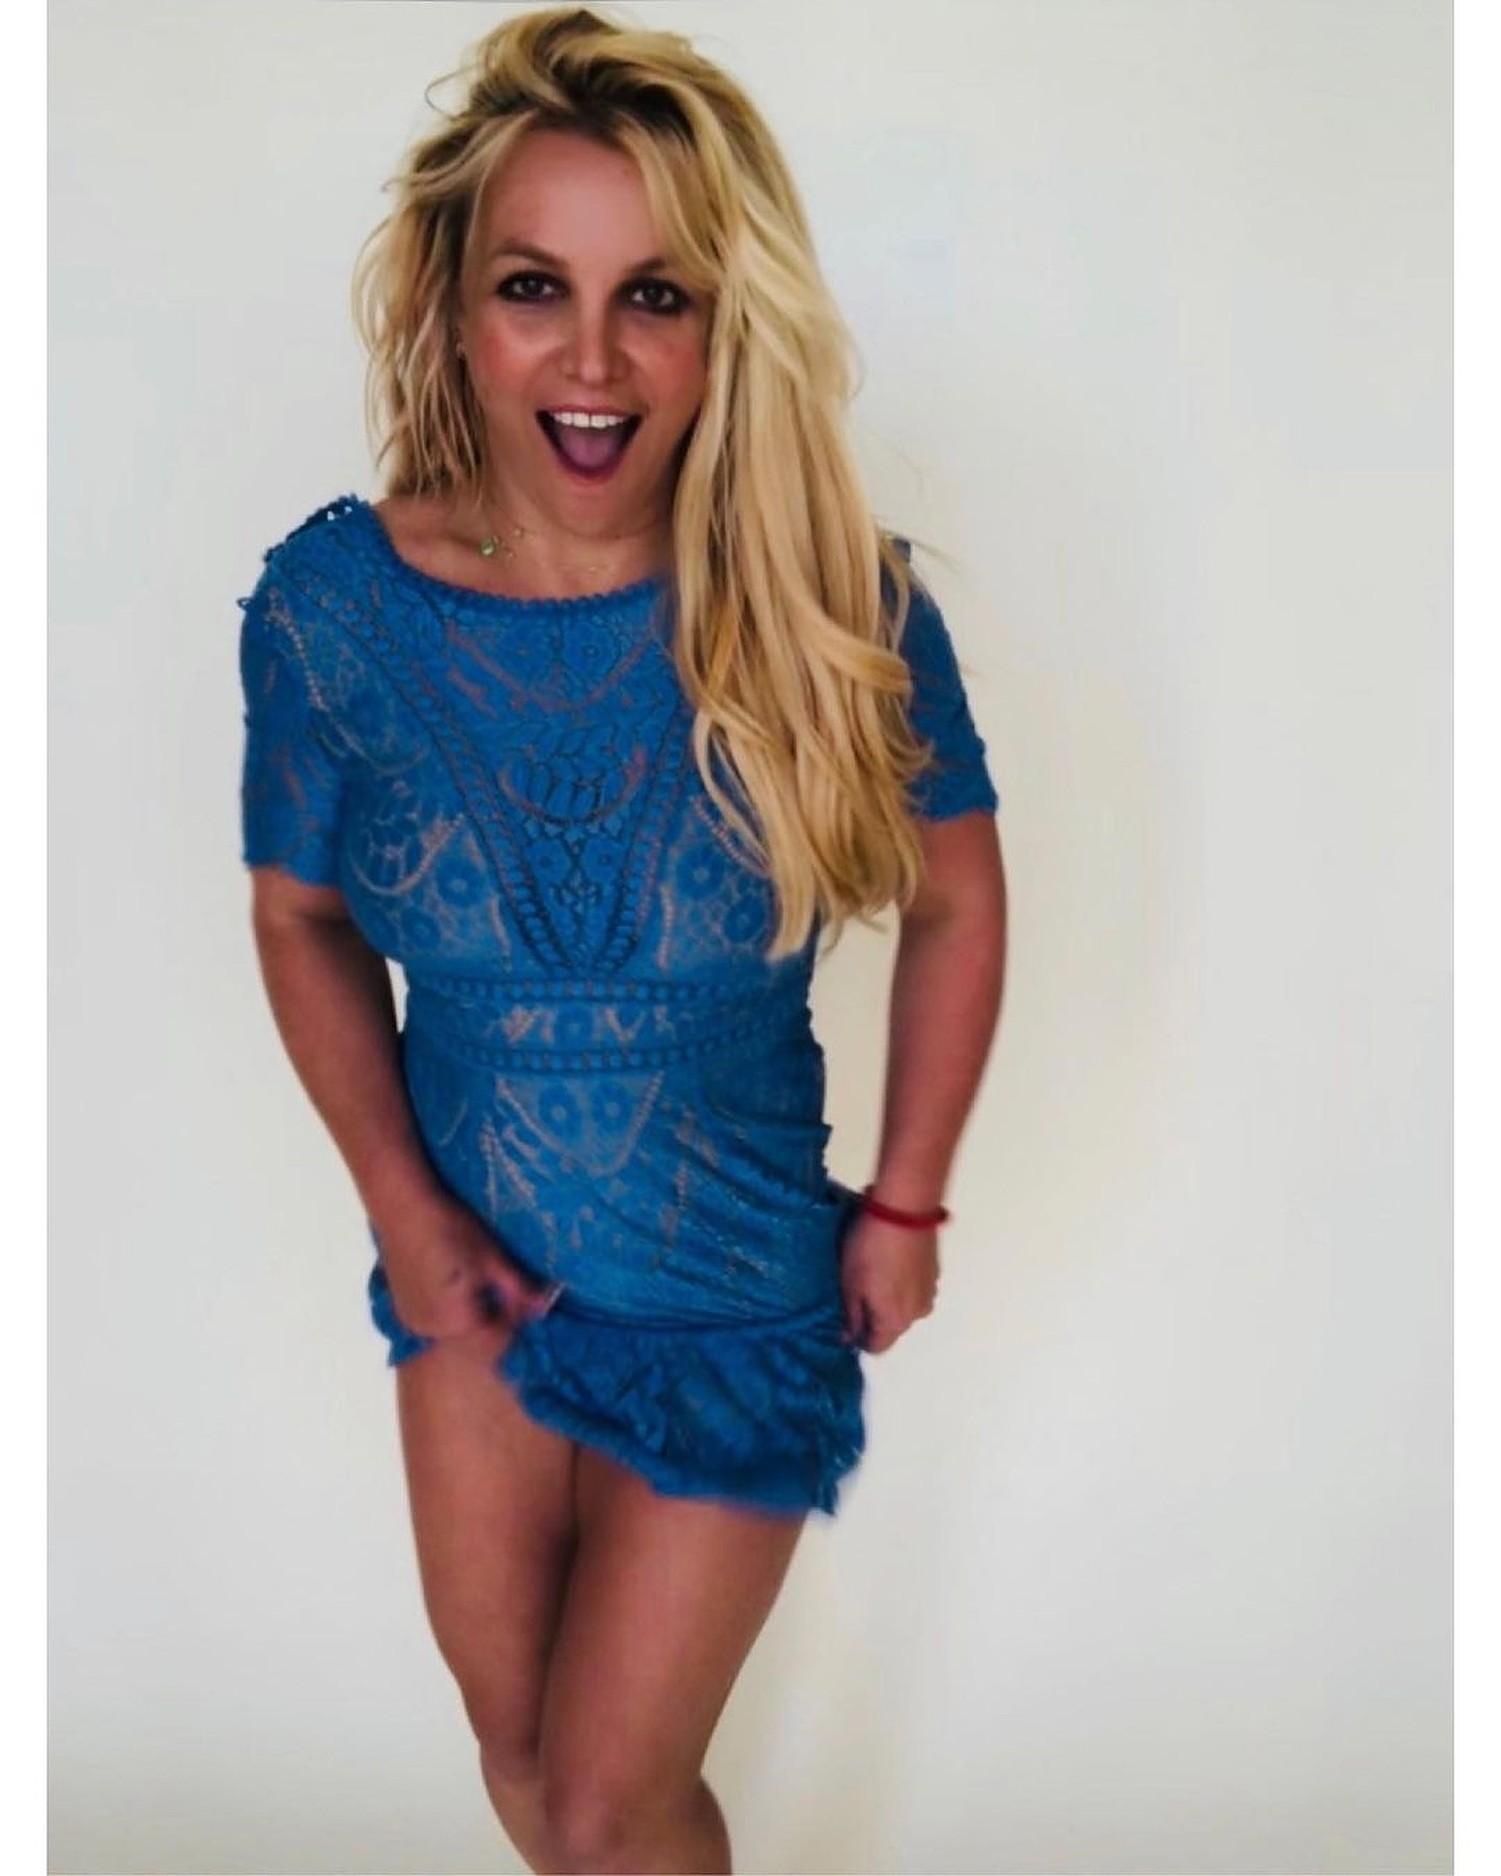 Instagram lets Britney nearly show all